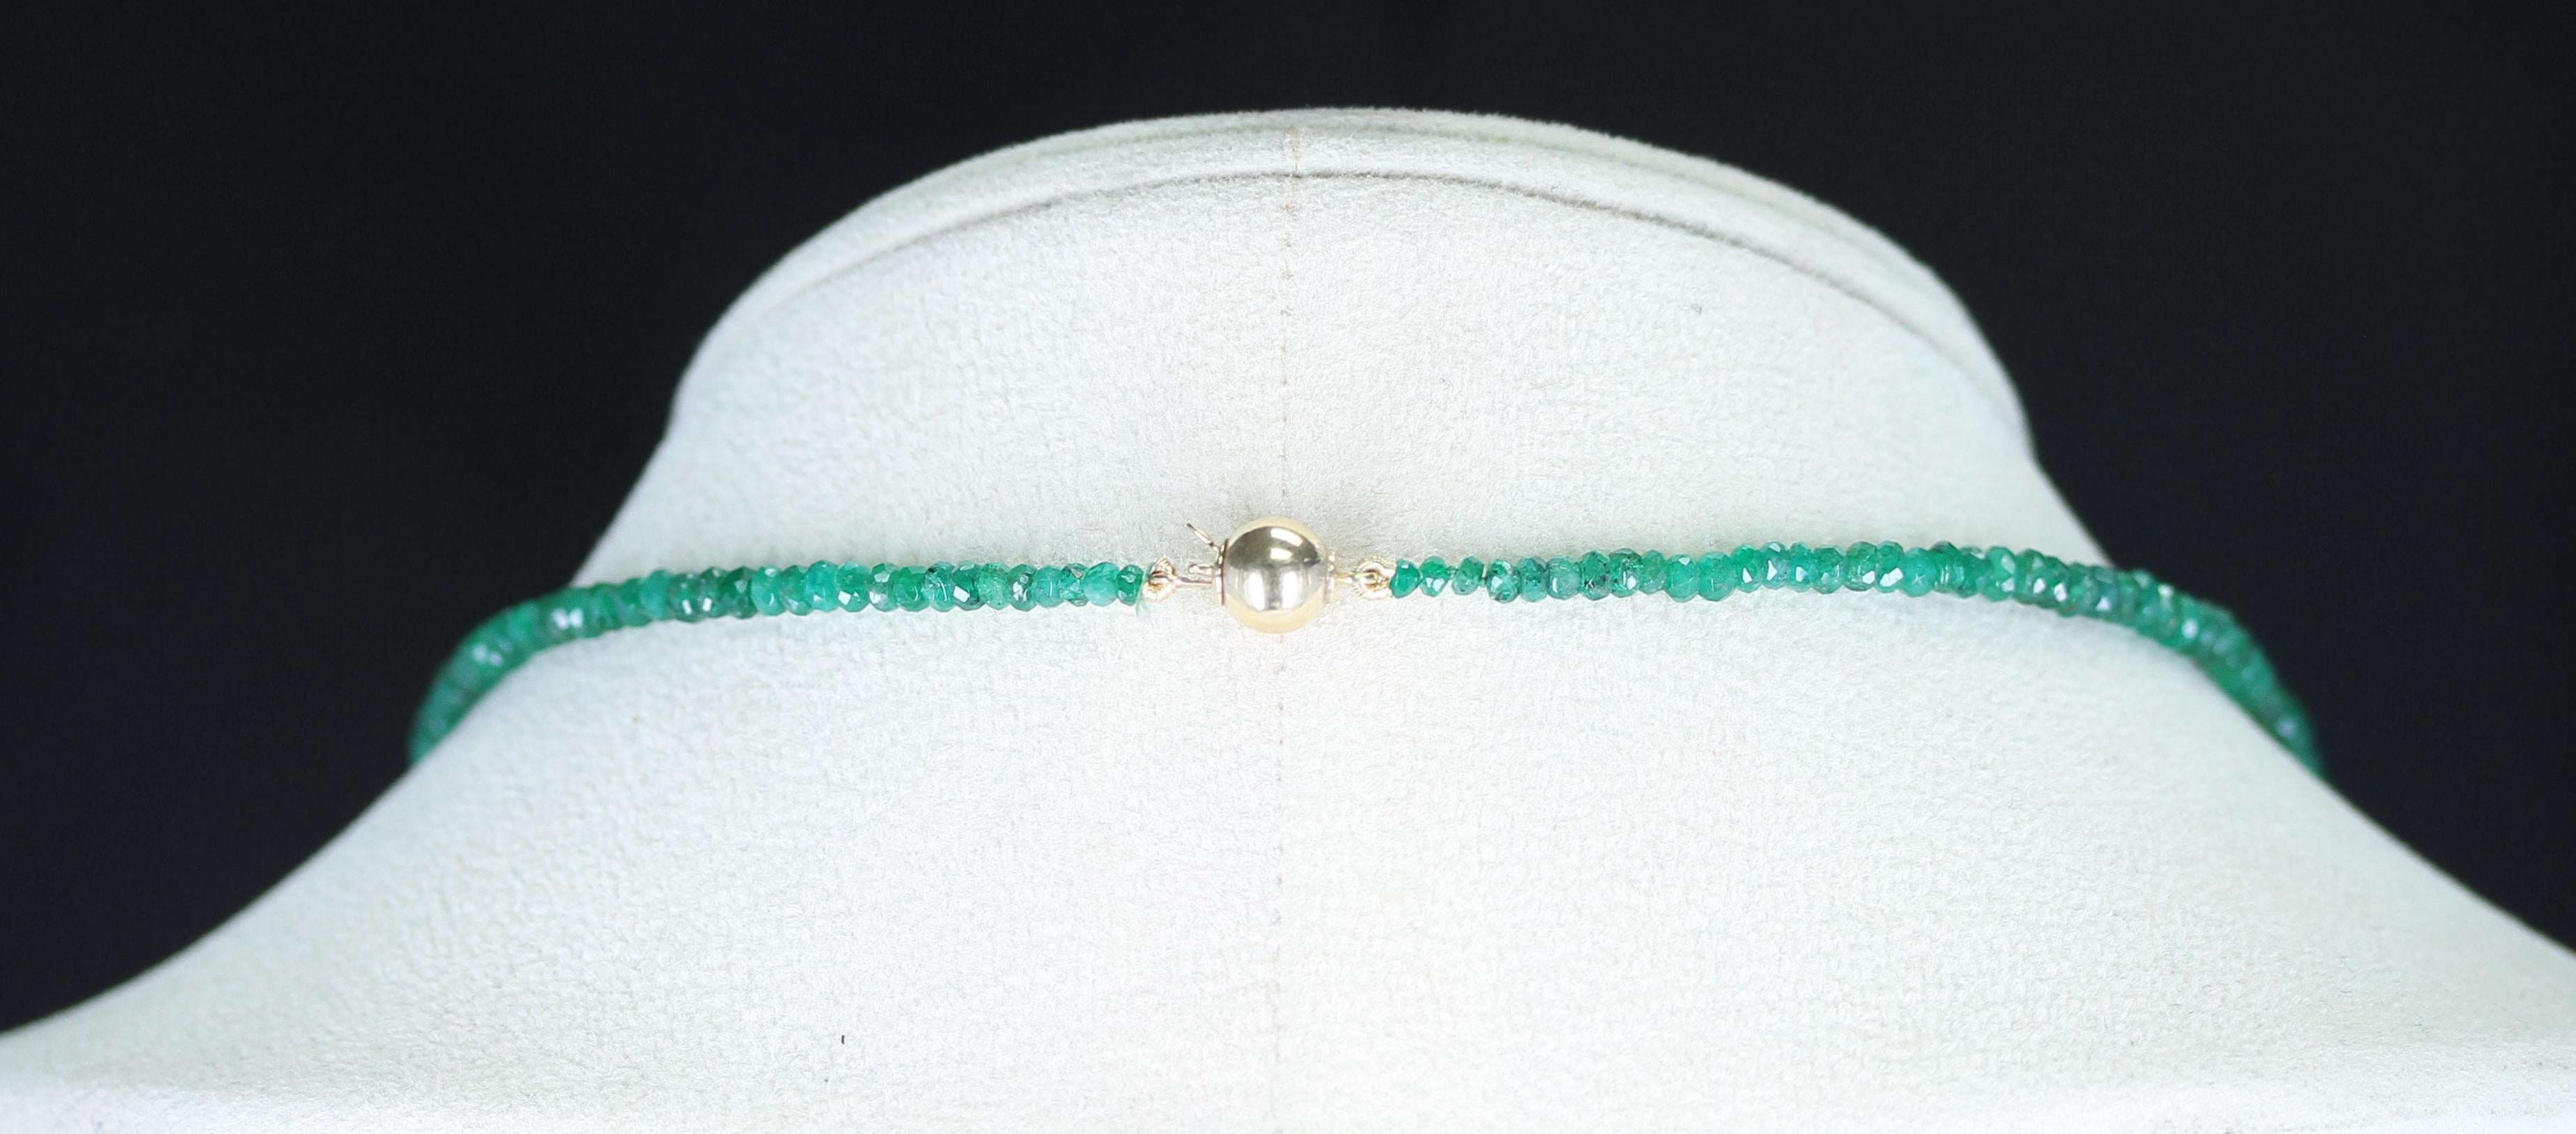 A Genuine & Natural Emerald Faceted Beads Necklace, with a 14K Clasp, weighing 69 carats. The length is 22.50 inches, and the size of the beads range from 3MM to 5MM. We can also customize the necklace according to your preferences, as per the